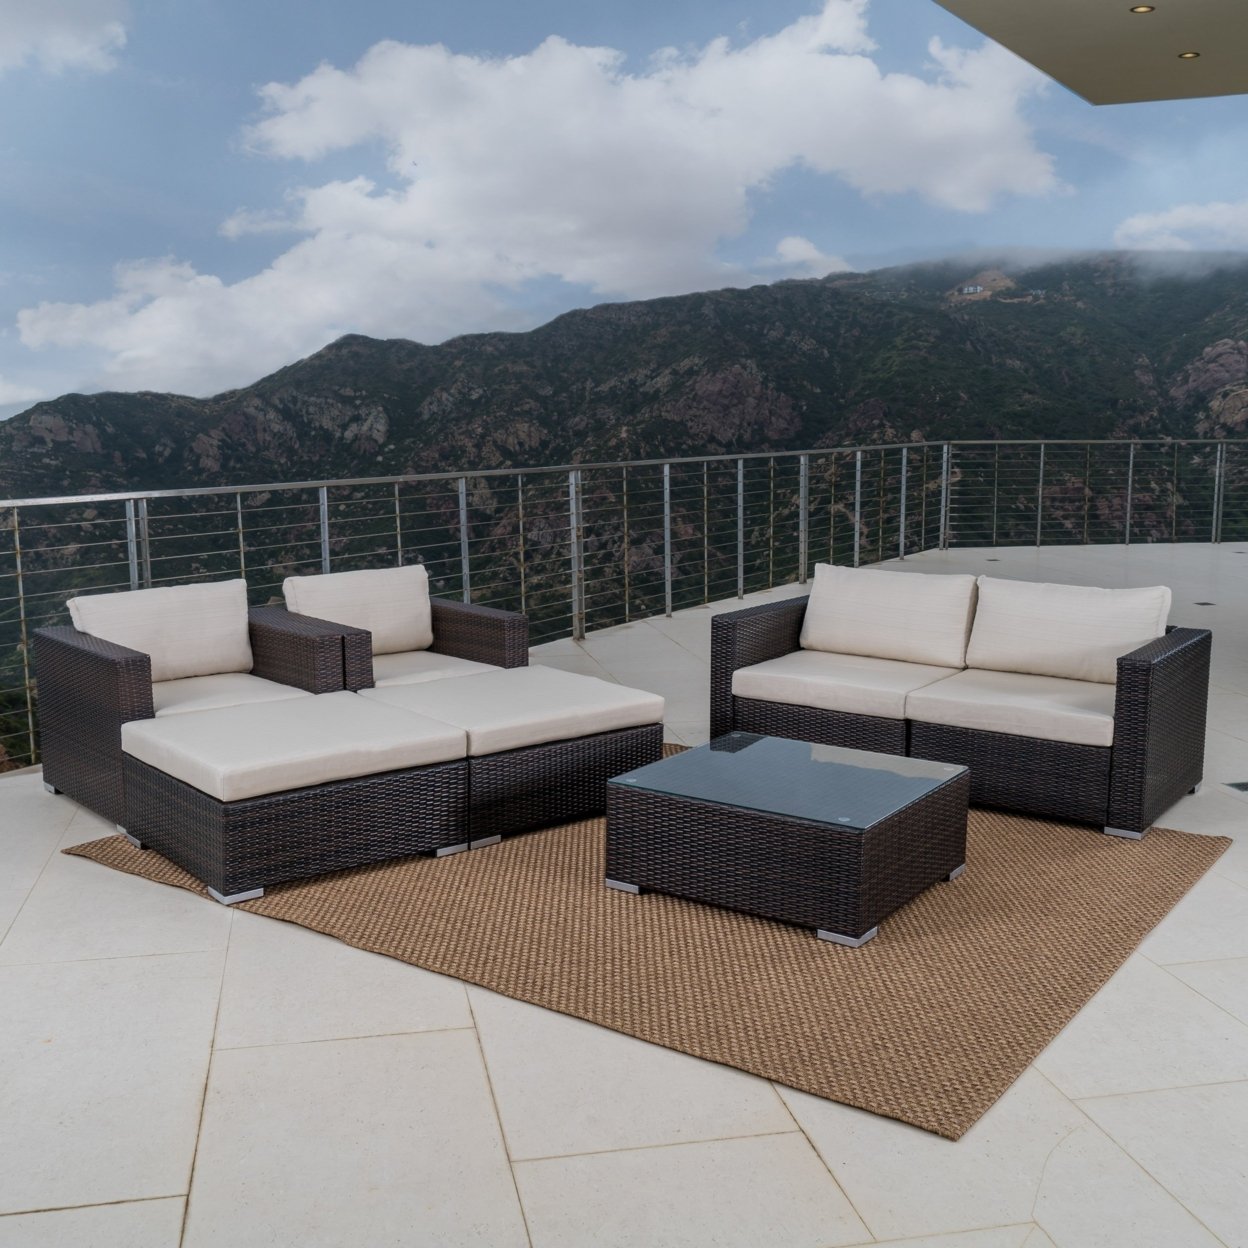 Francisco Outdoor Wicker Sectional With Cushions - Gray/Silver, 8 Piece Set